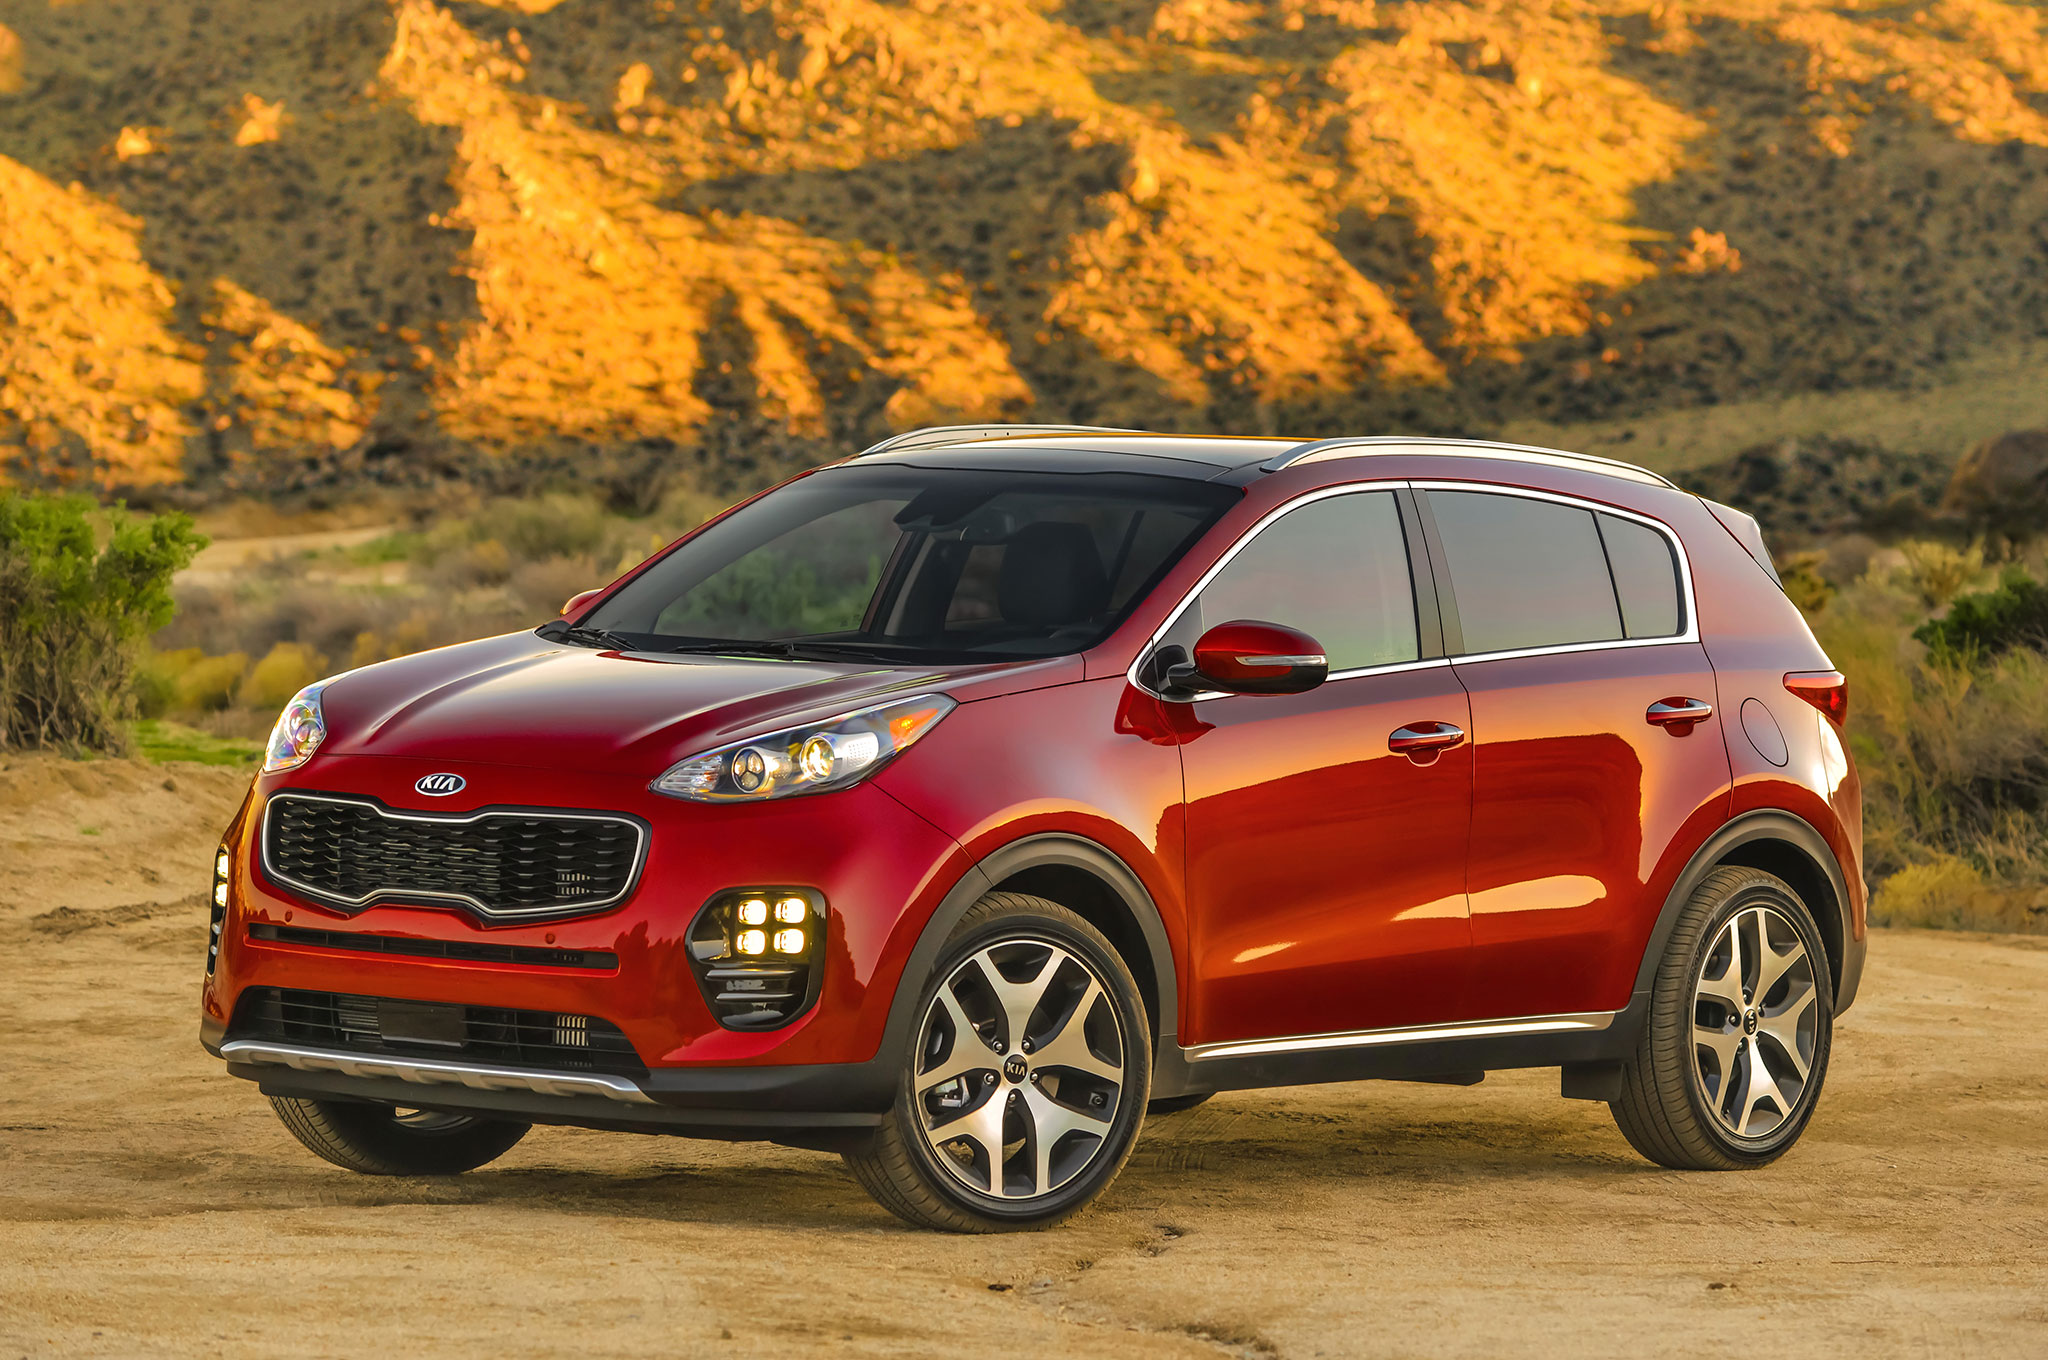 2018 Kia Sportage Sx Turbo Test Drive And Review Specifications Pricing